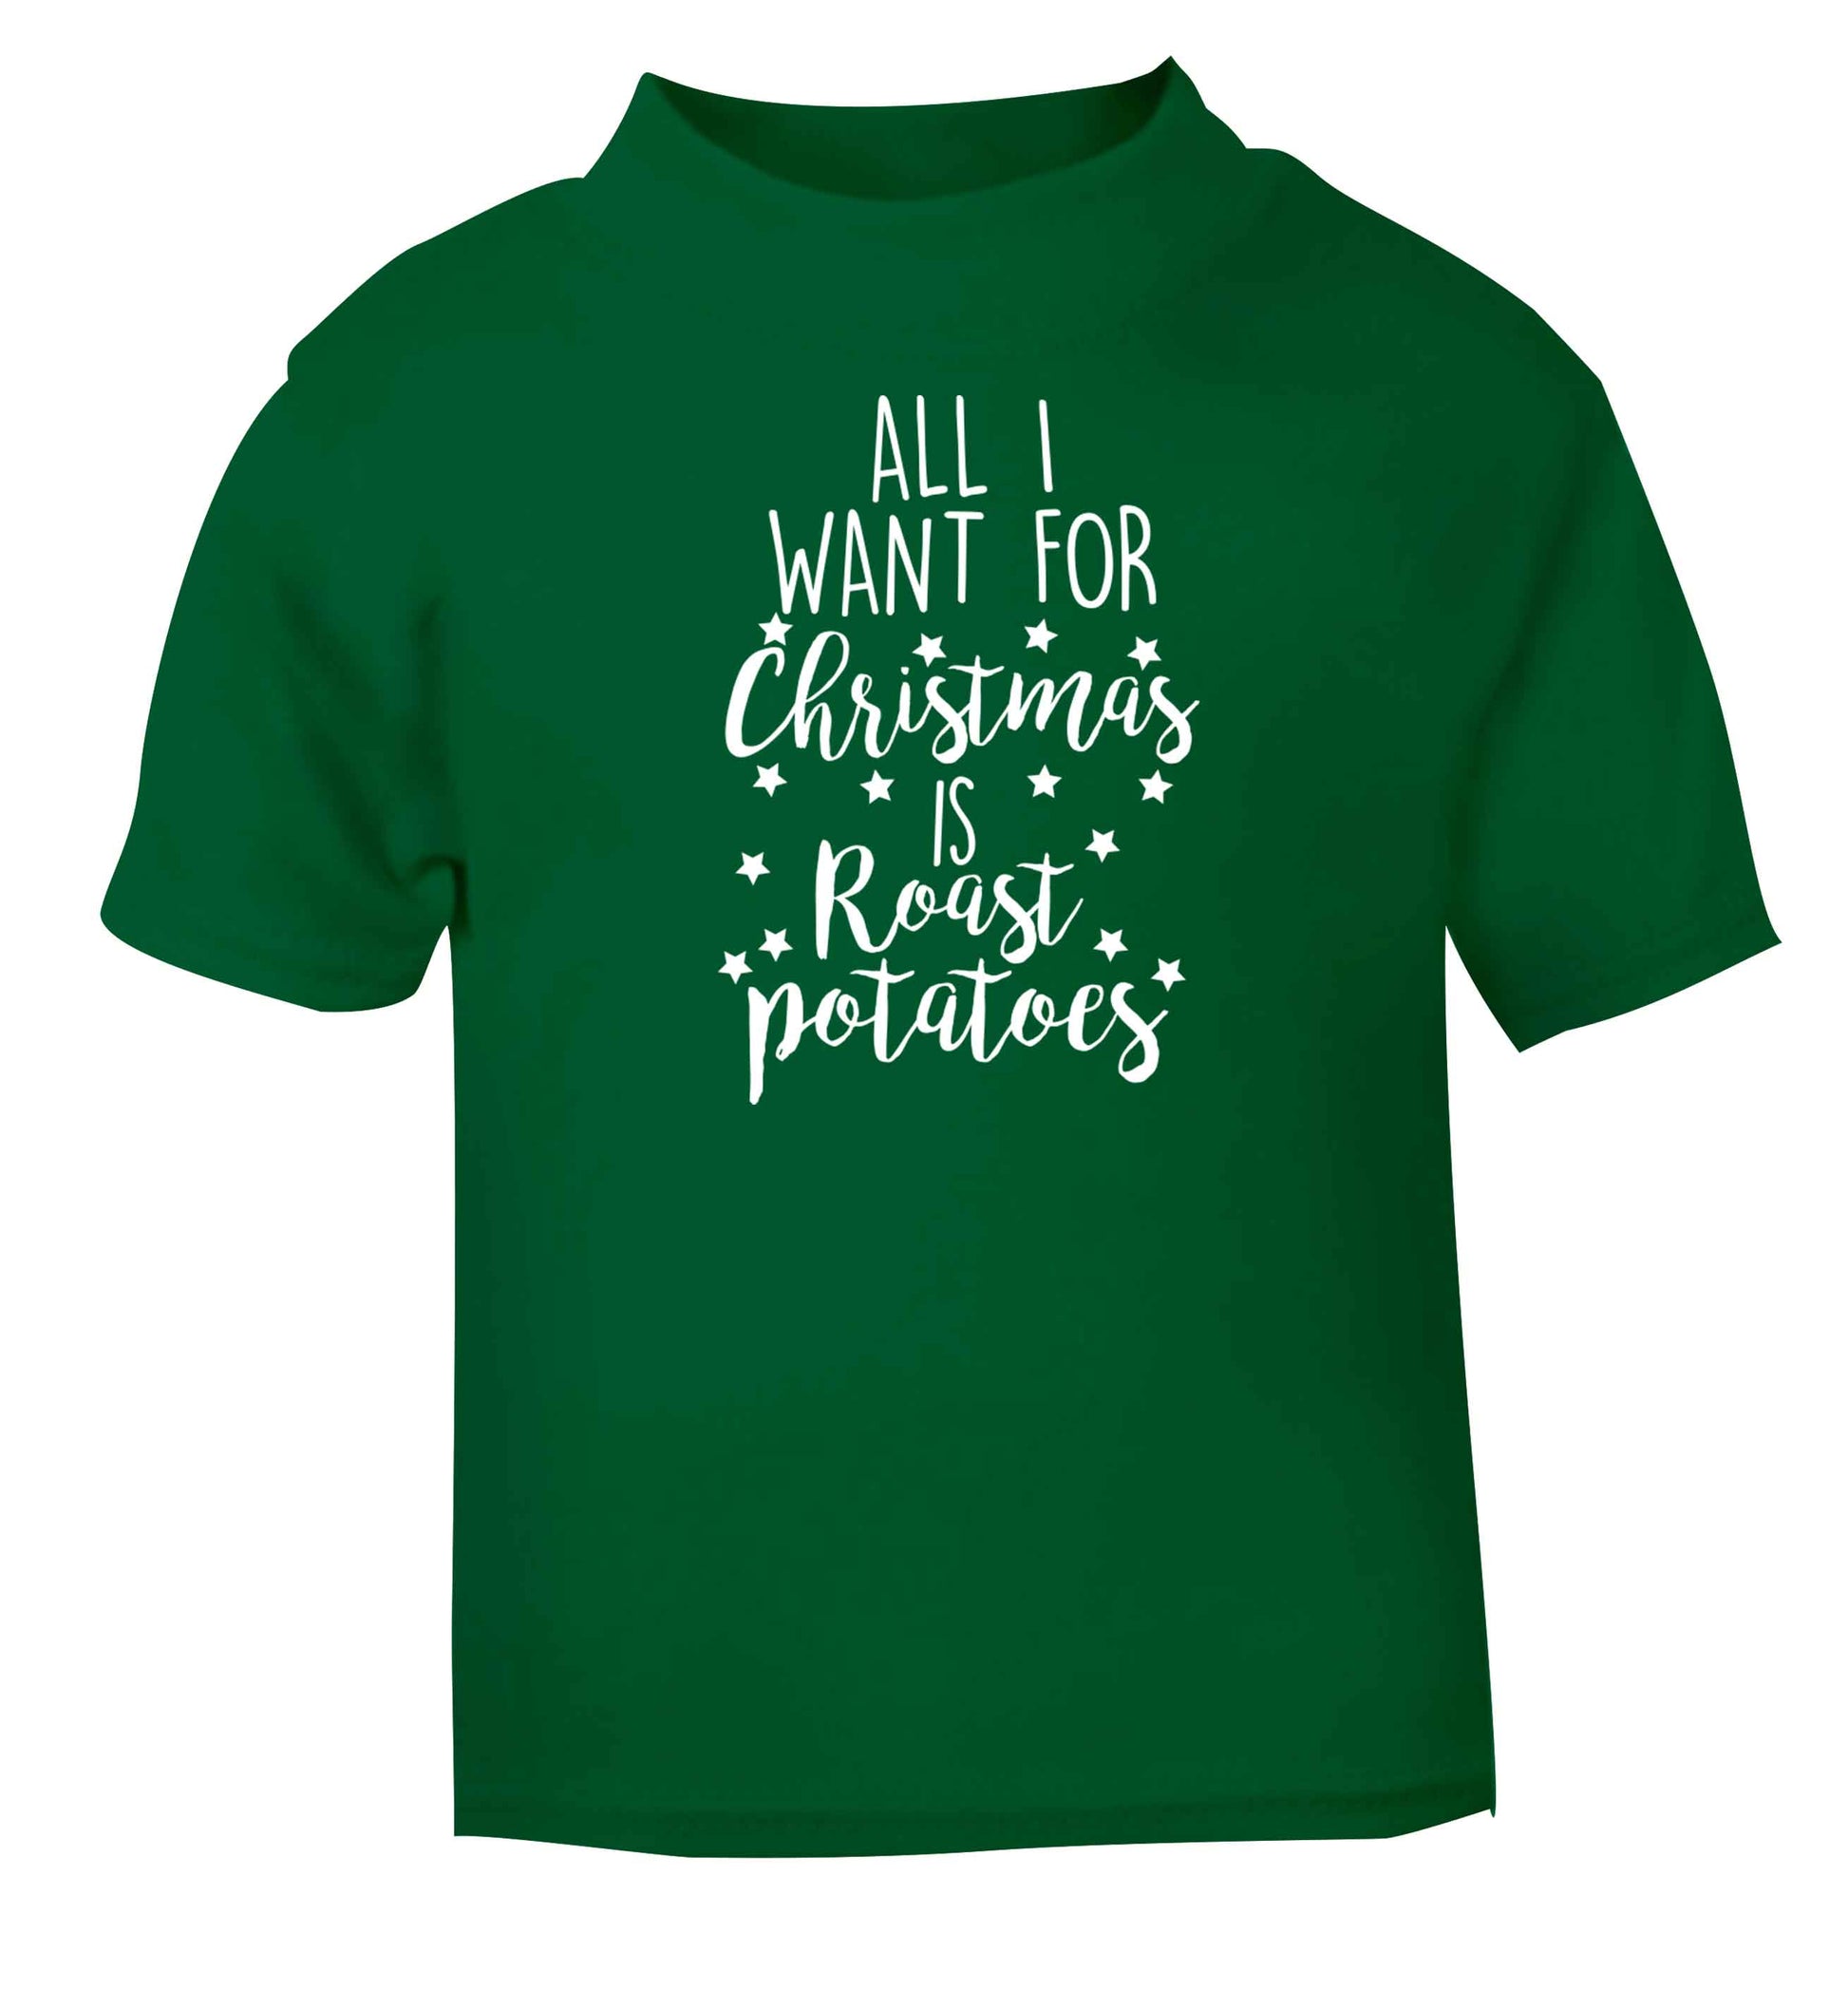 All I want for Christmas is roast potatoes green baby toddler Tshirt 2 Years